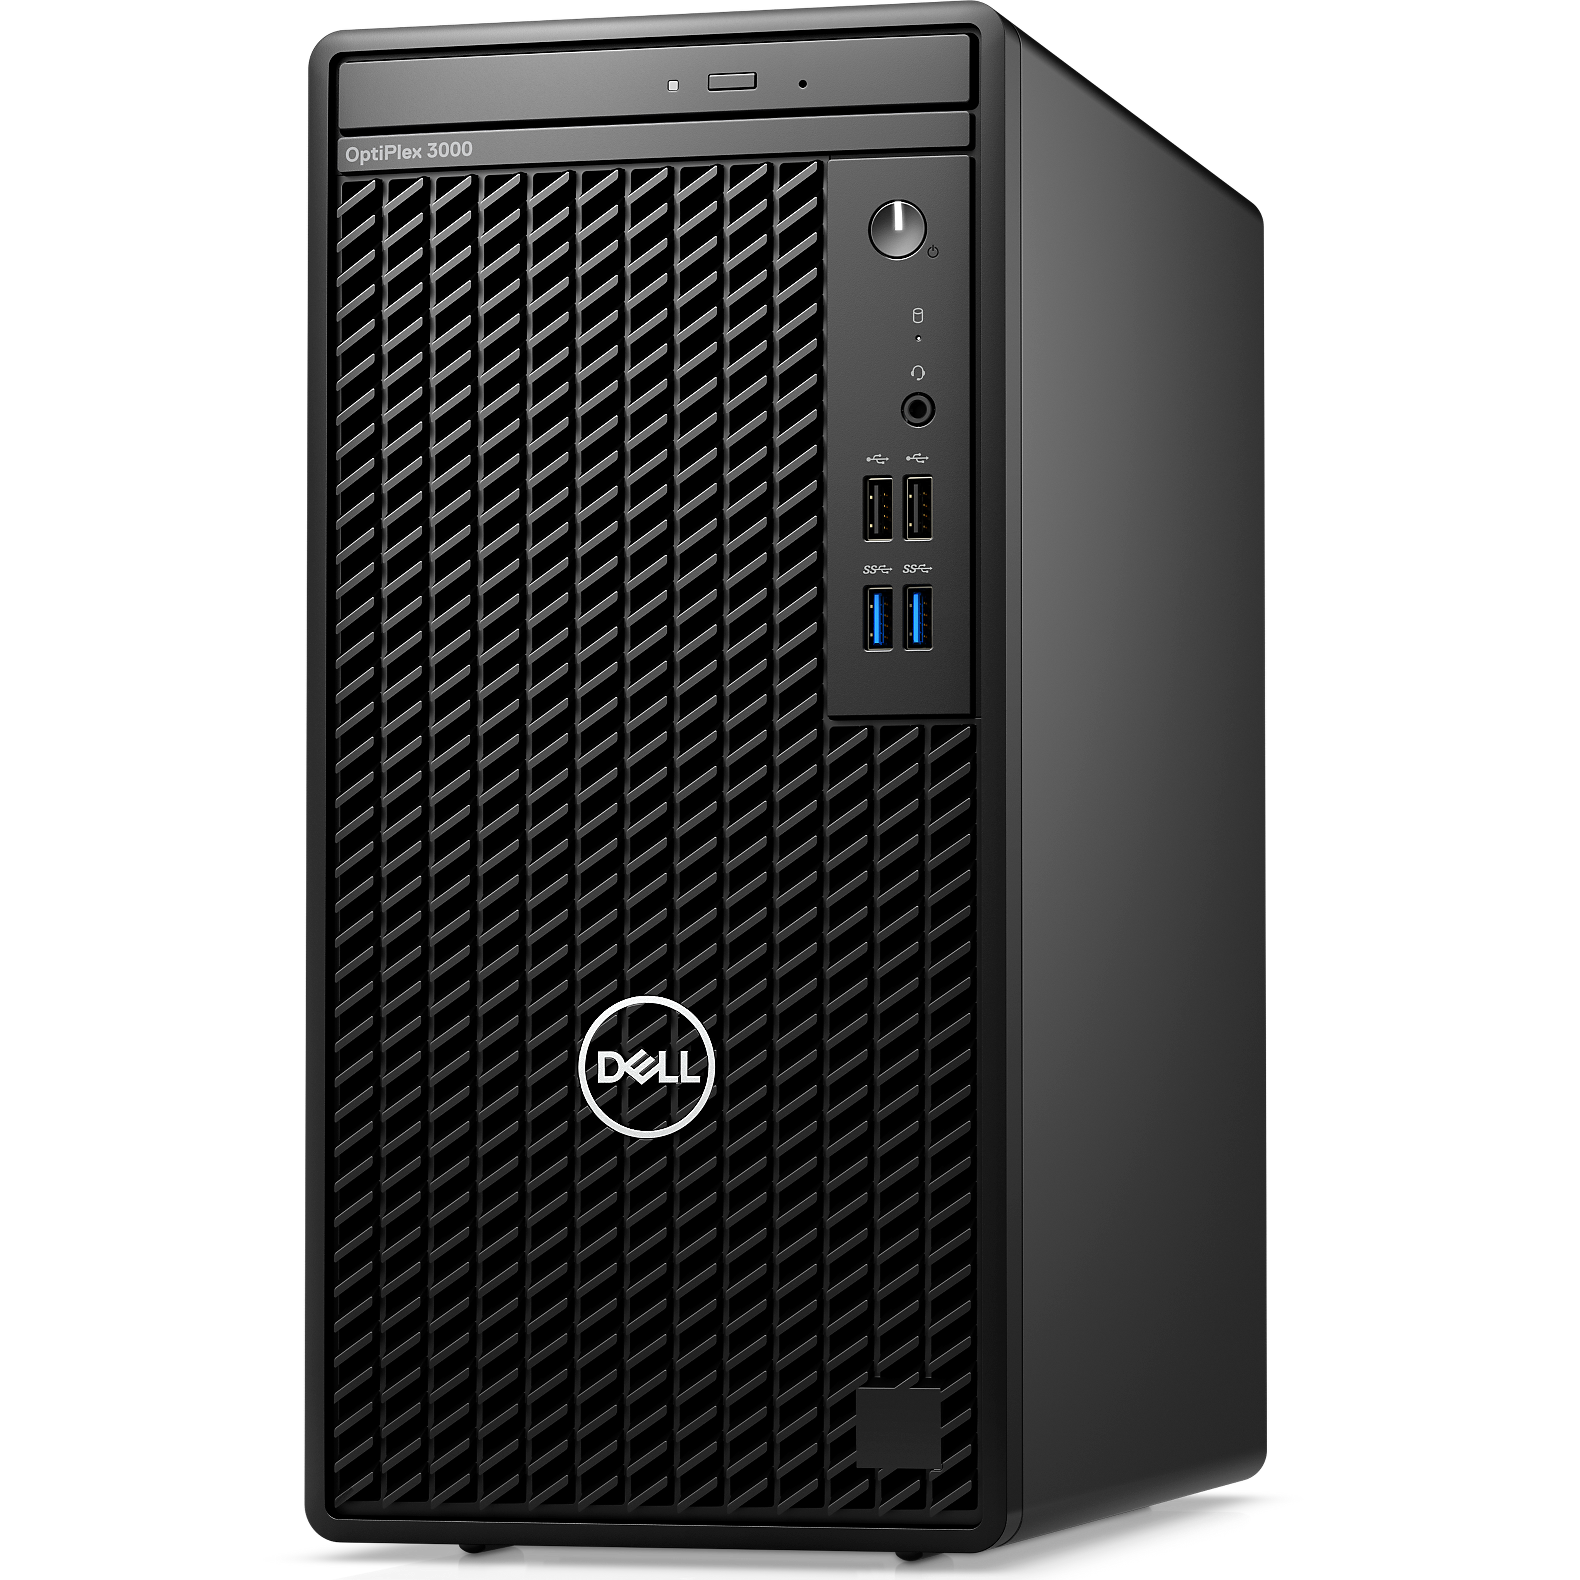 https://i.dell.com/is/image/DellContent/content/dam/ss2/products/desktops-and-all-in-ones/optiplex/3000-tsff/pdp/desktop-optiplex-3000-tsff-pdp-mod02c.psd?wid=1920&hei=1580&fmt=png-alpha&qlt=90%2c0&op_usm=1.75%2c0.3%2c2%2c0&resMode=sharp&pscan=auto&fit=constrain%2c1&align=0%2c0